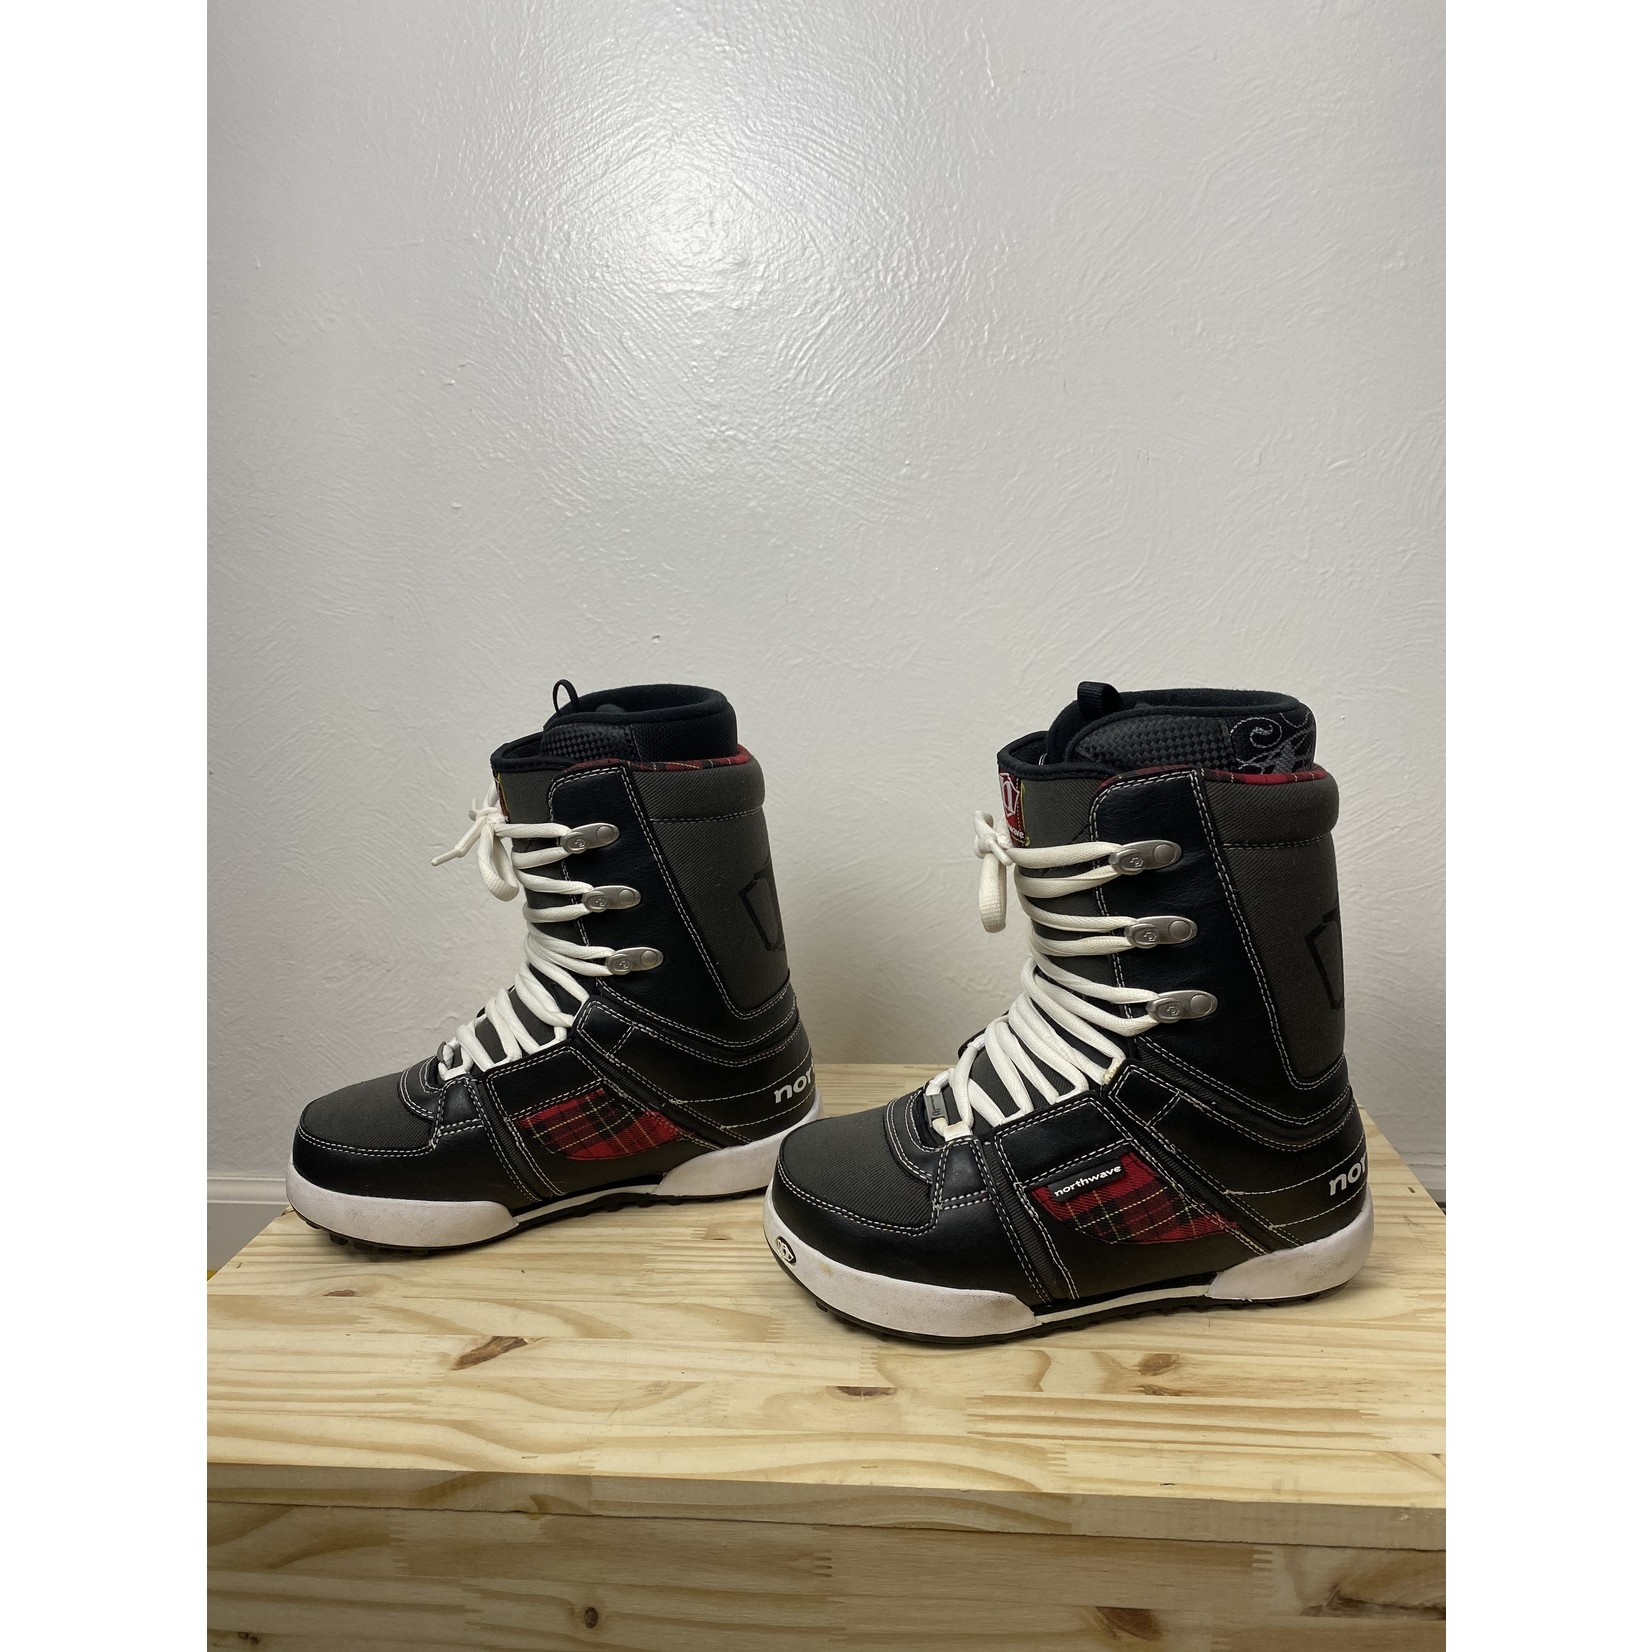 Northwave Northwave Snowboard Boots, Size 6, SOLD AS IS, NO REFUNDS OR EXCHANGES